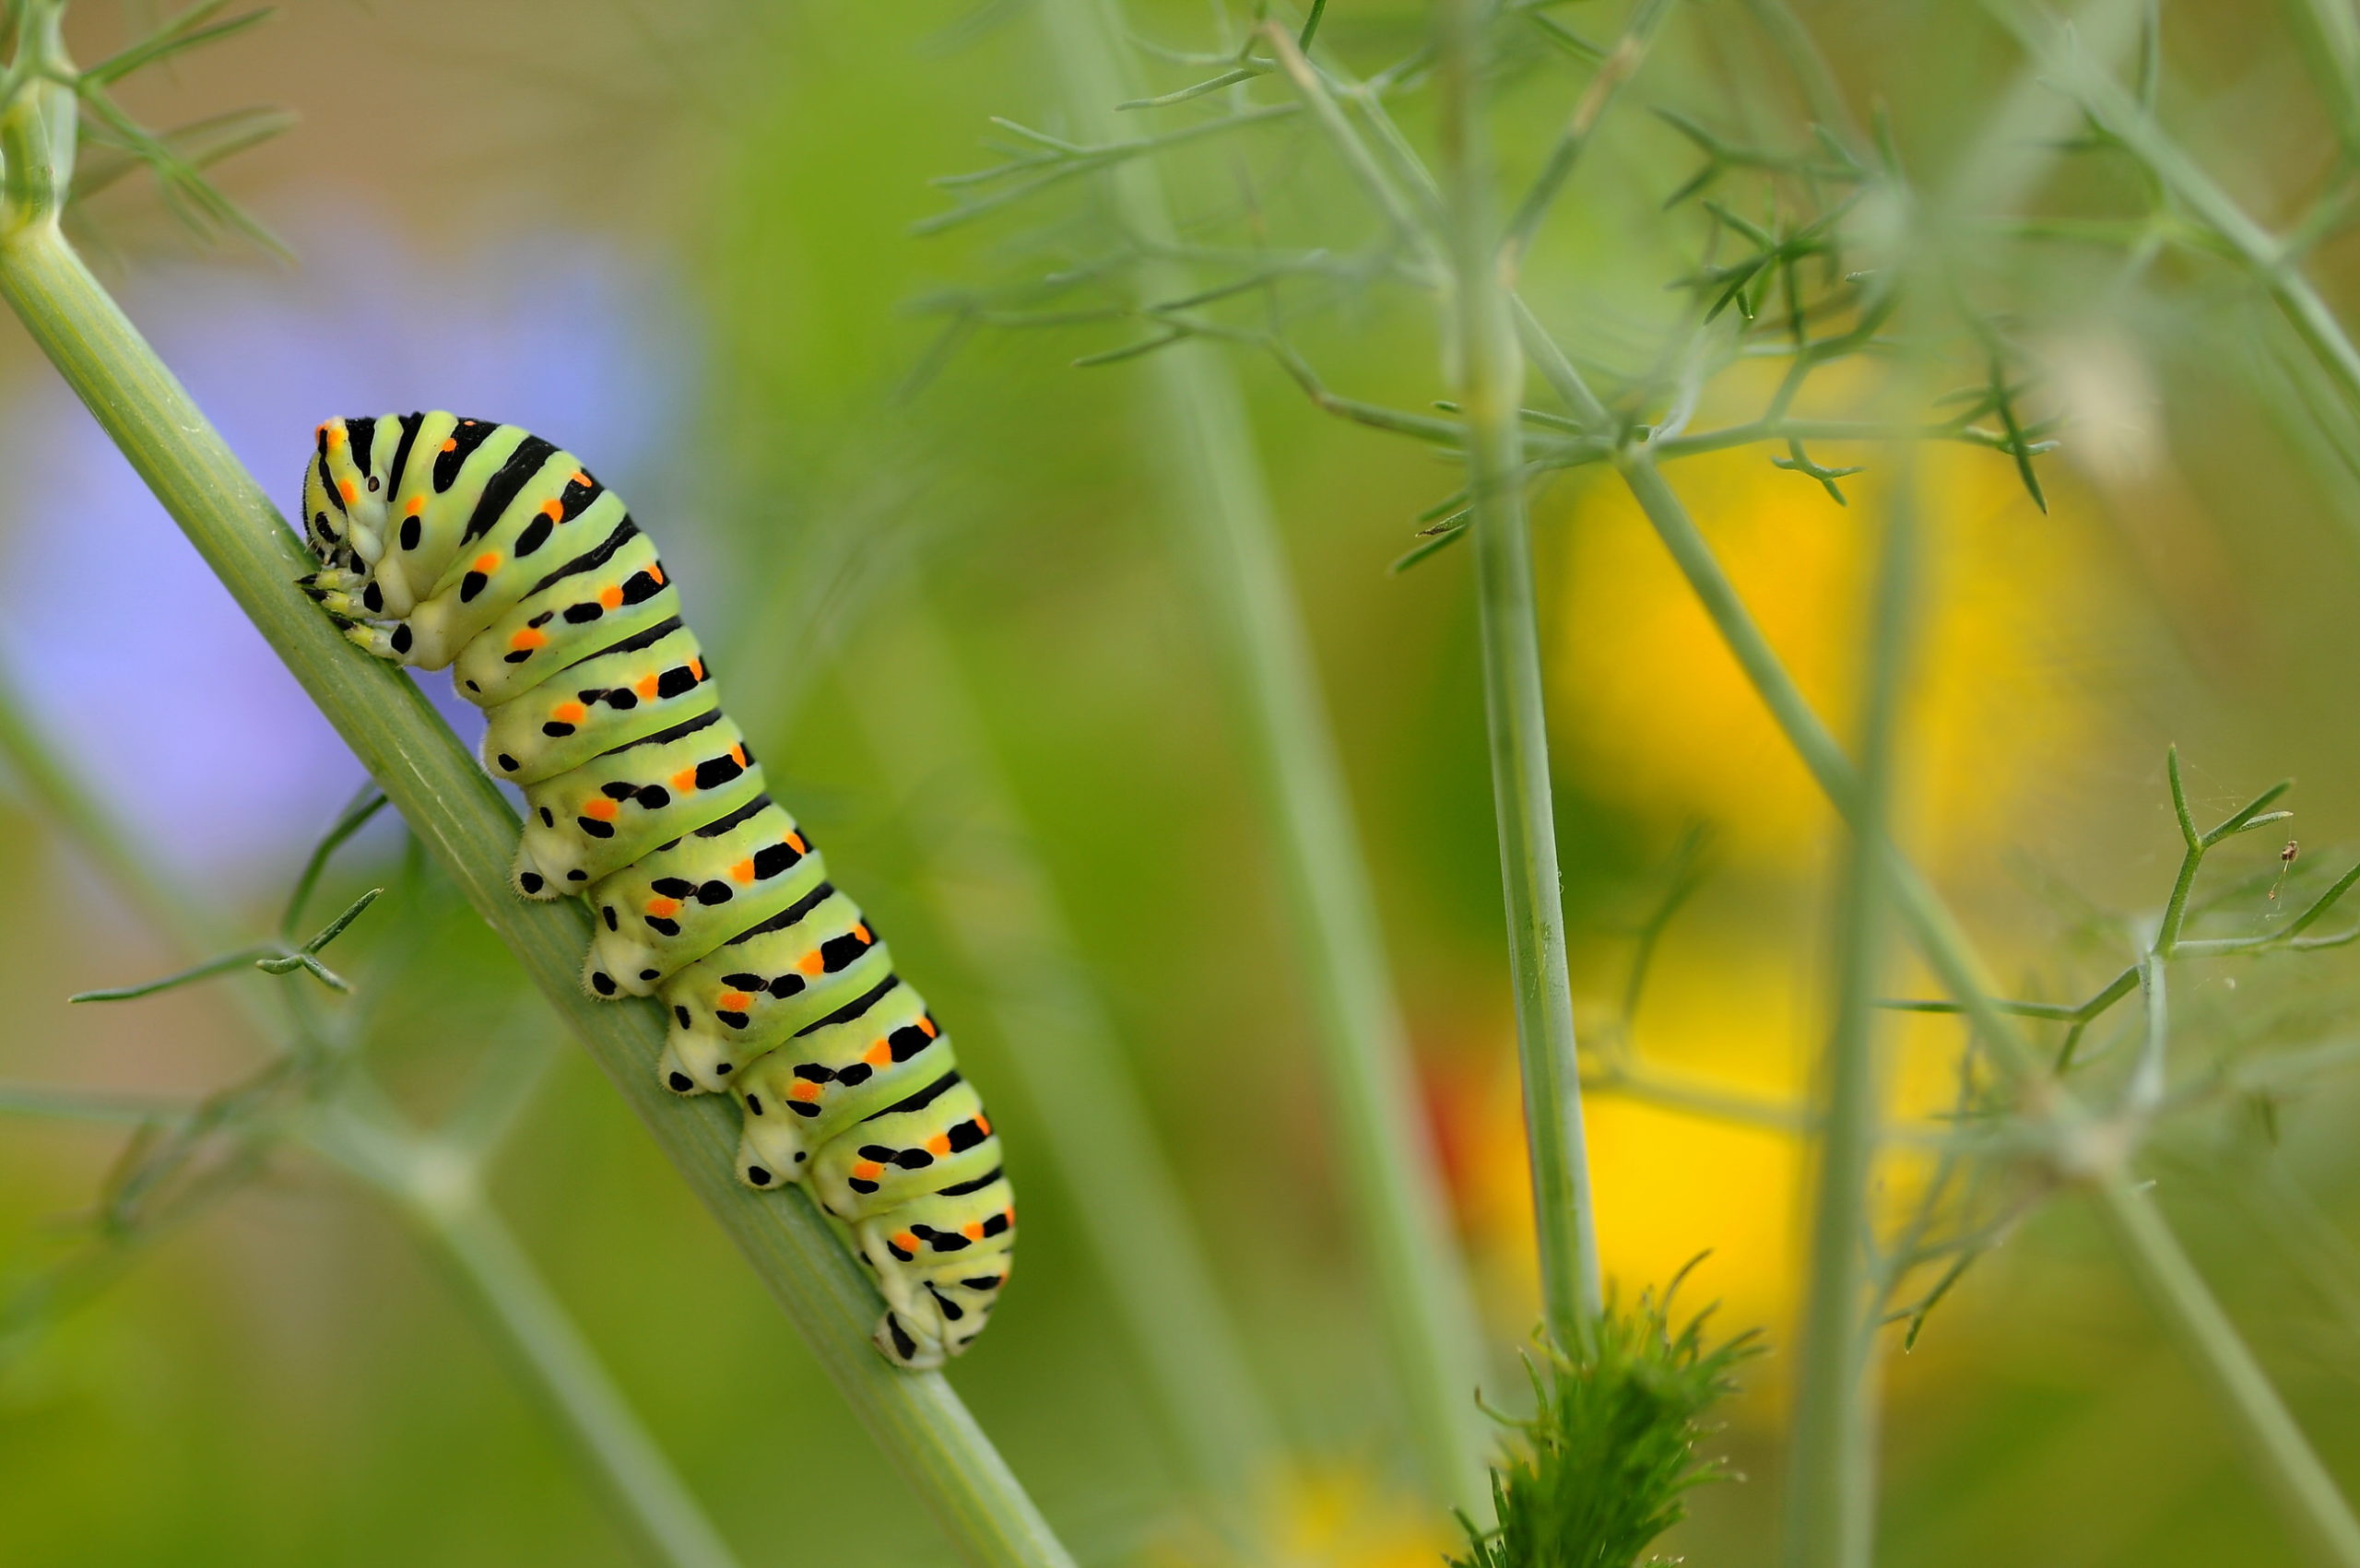 A swallowtail caterpillar amongst dune vegetation at Dunas de Mira in Portugal. João Petronilho used a tripod and flash for this well-composed and atmospheric picture.